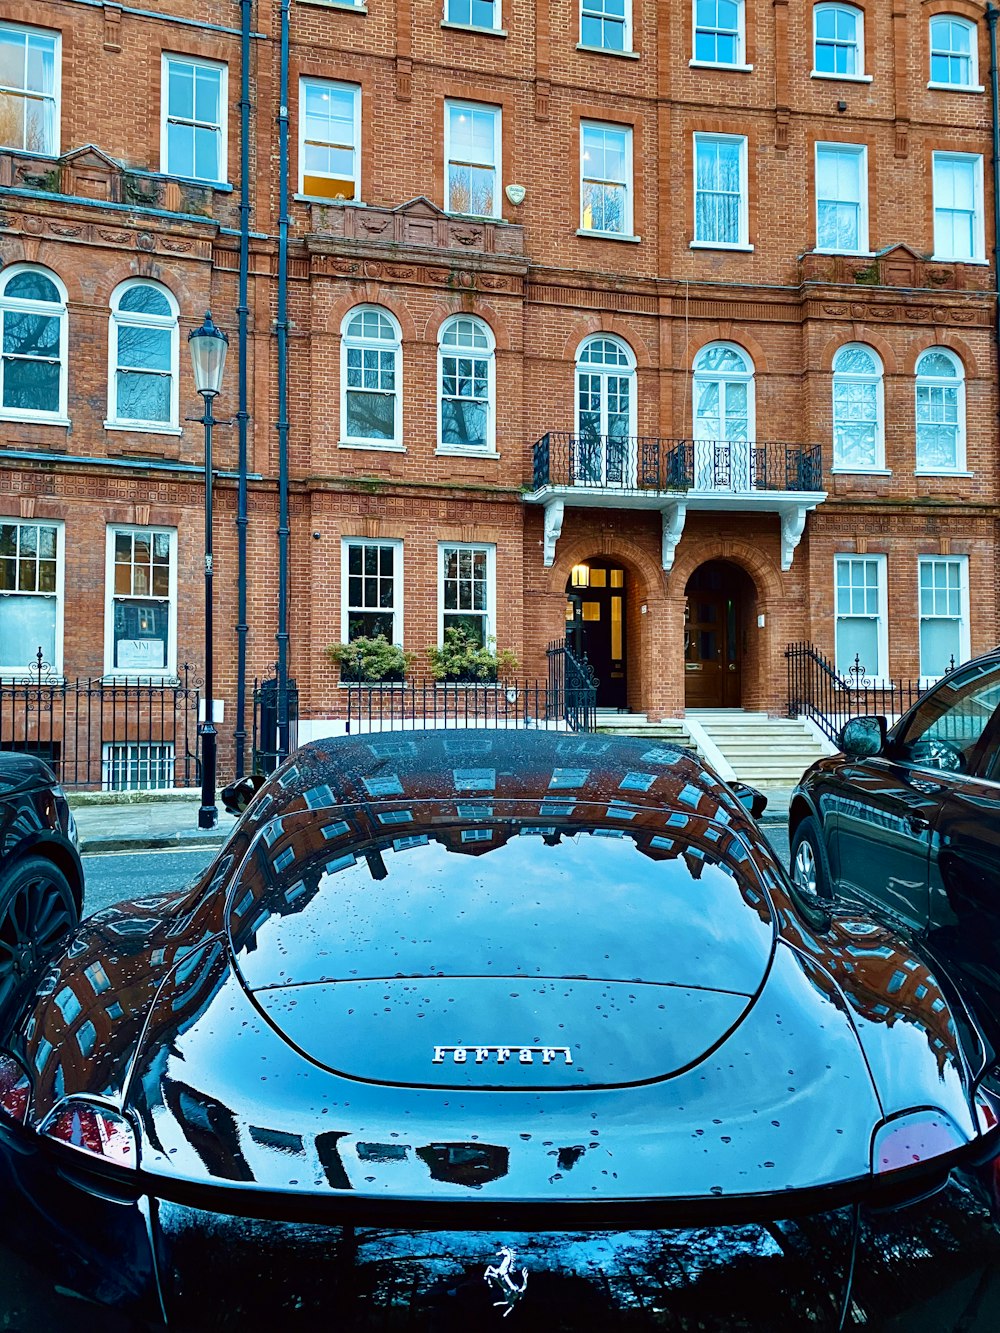 a black sports car parked in front of a building